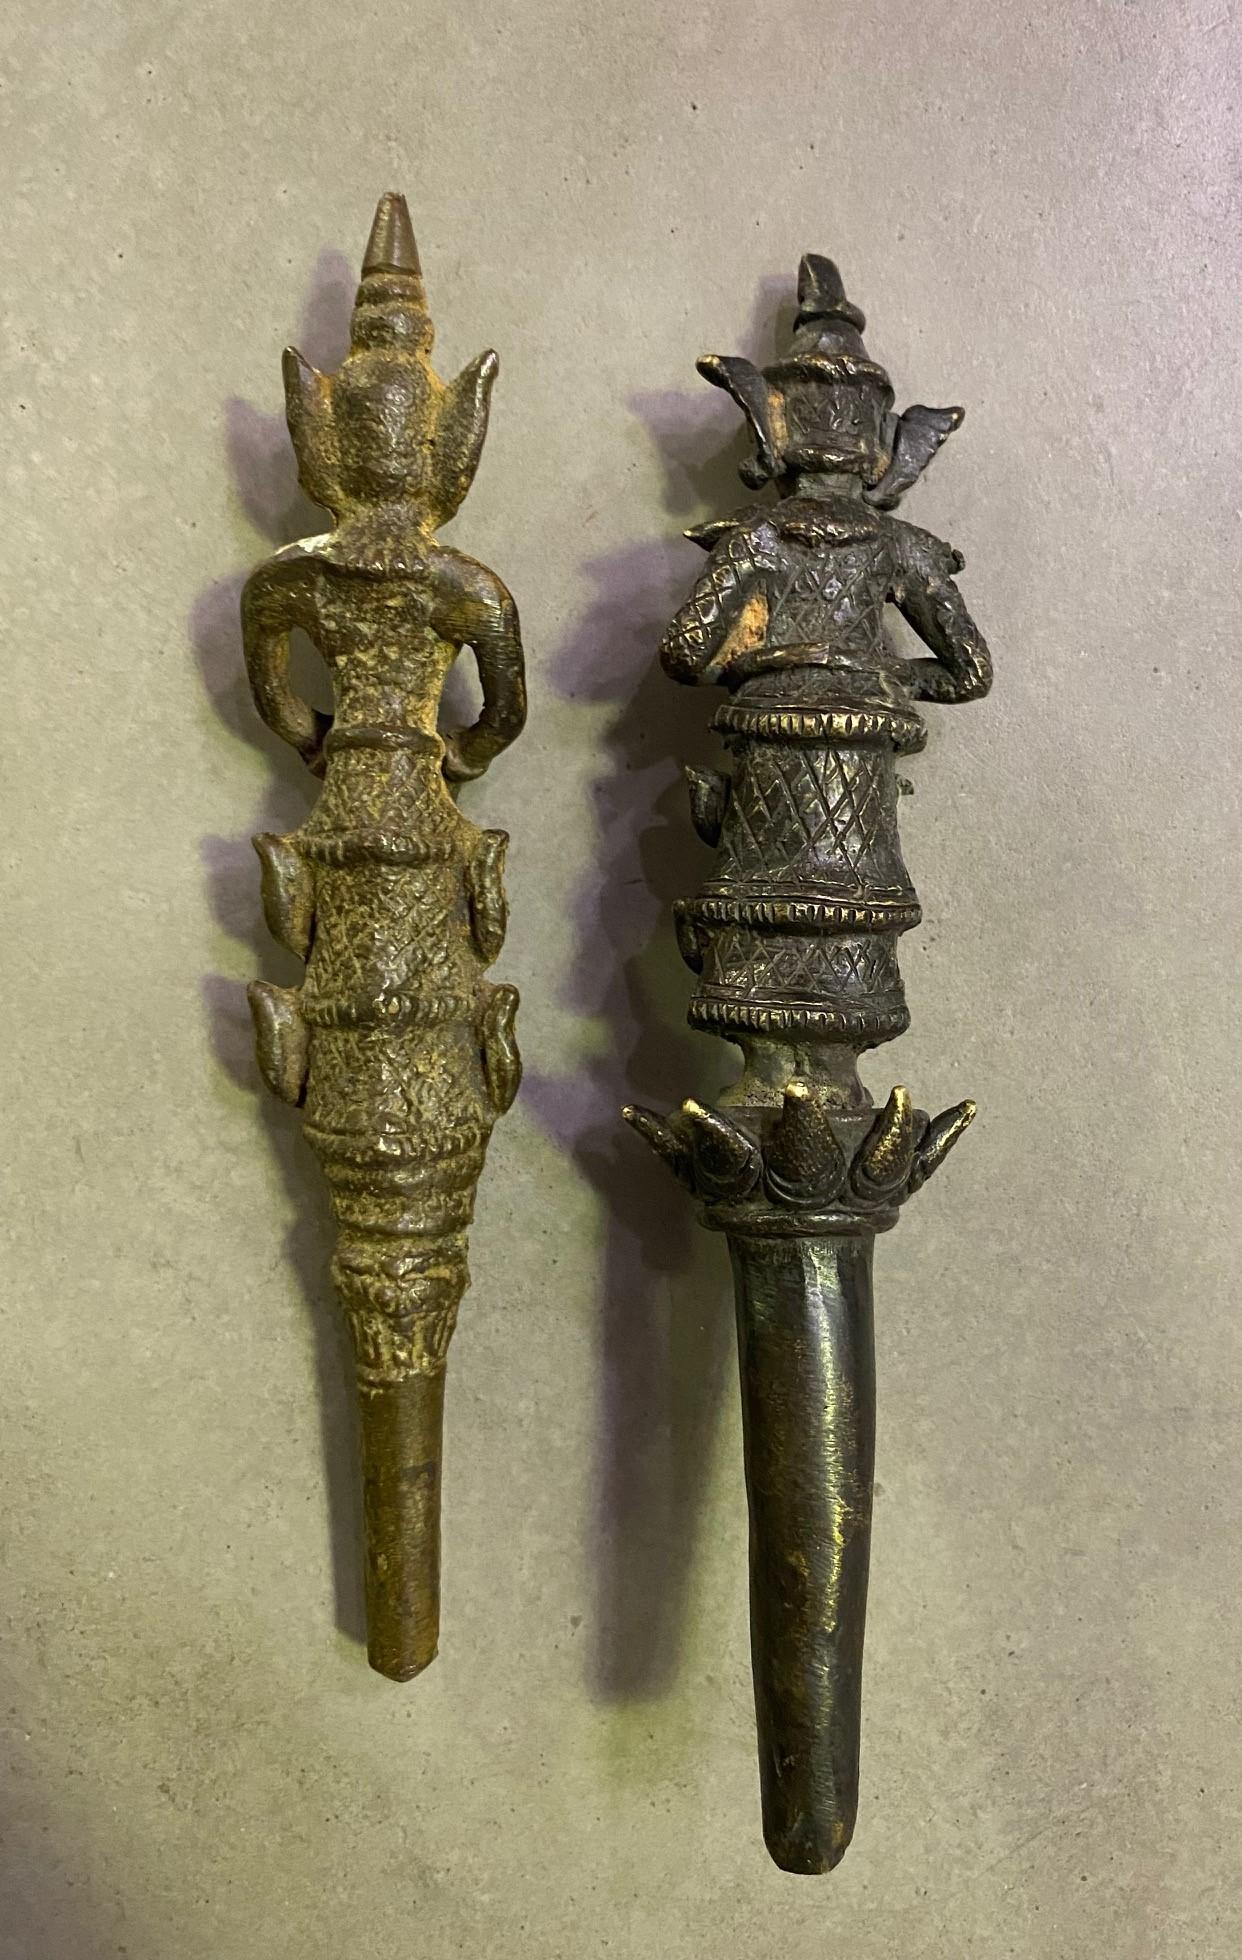 19th Century Pair of Tibetan or Nepalese Bronze Amulets Temple Shrine Figures Artifacts For Sale